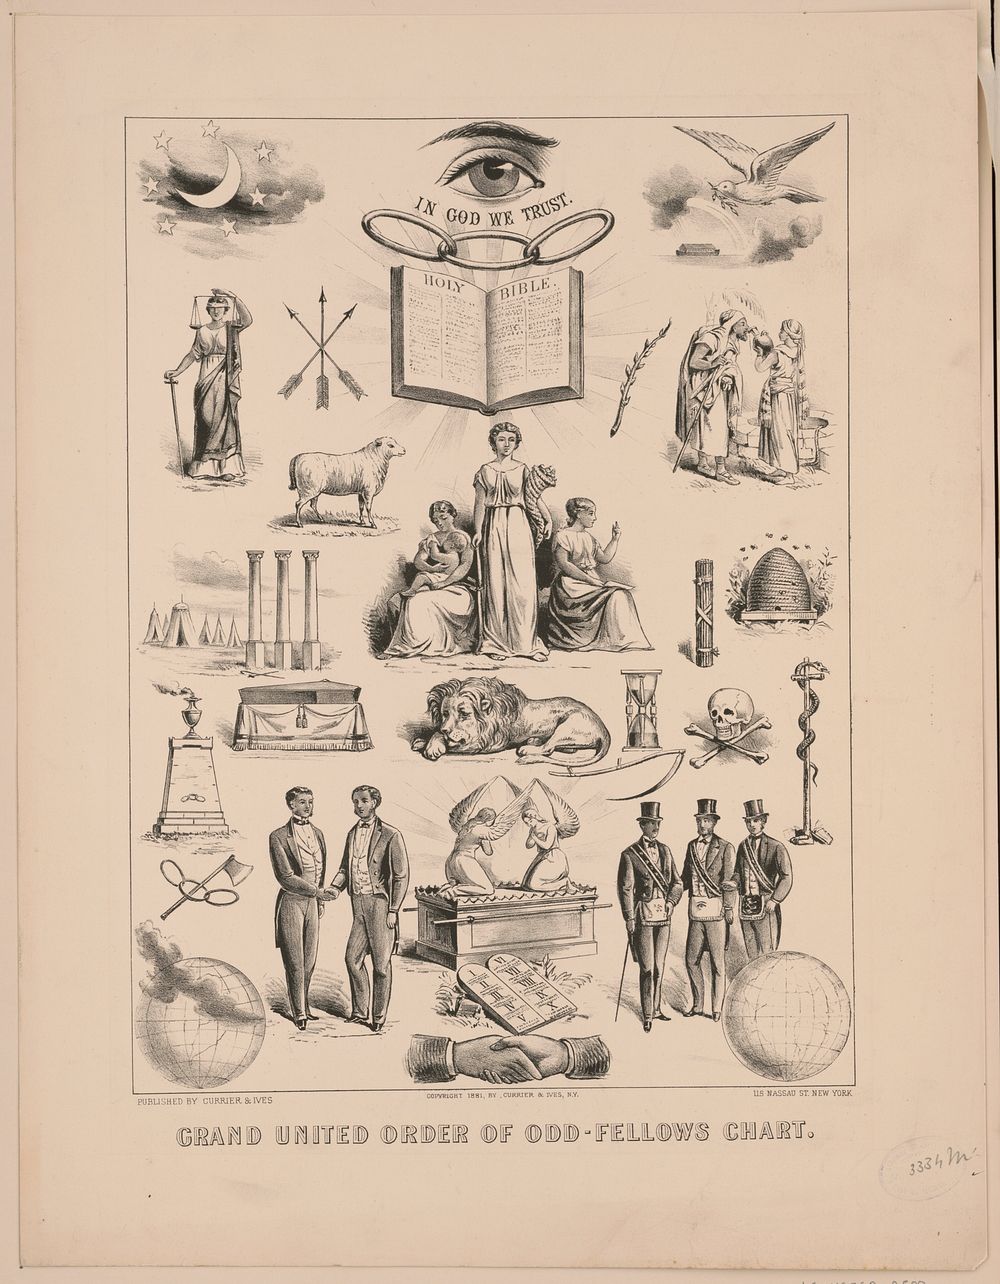 Grand United Order of Odd-Fellows chart, Currier & Ives.